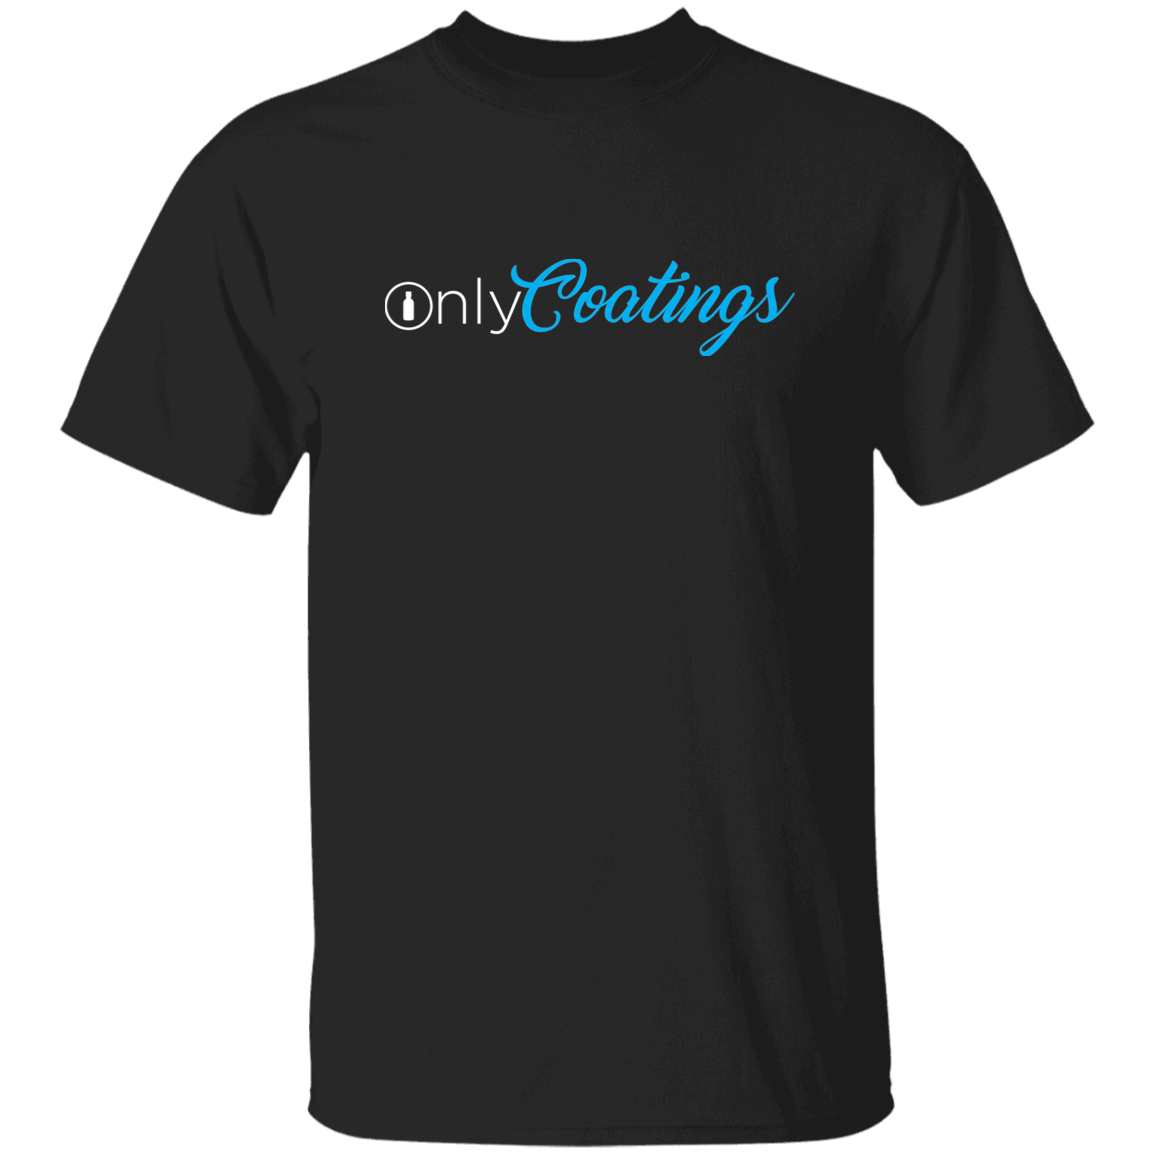 OnlyCoatings T-Shirt